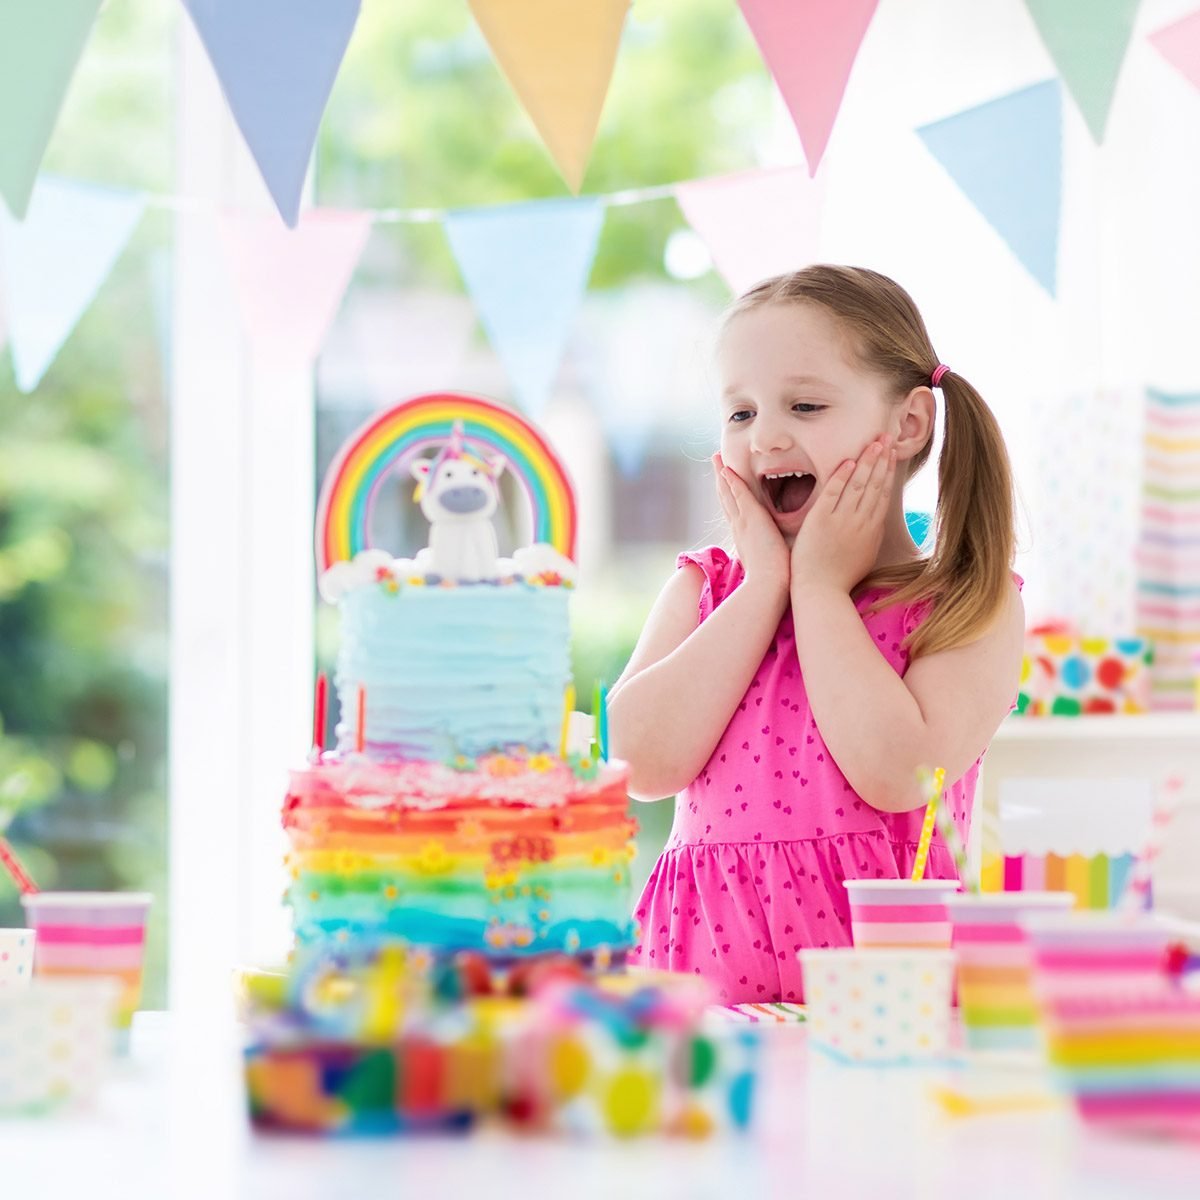 Rainbow Themed Birthday Party - Party Ideas for Real People